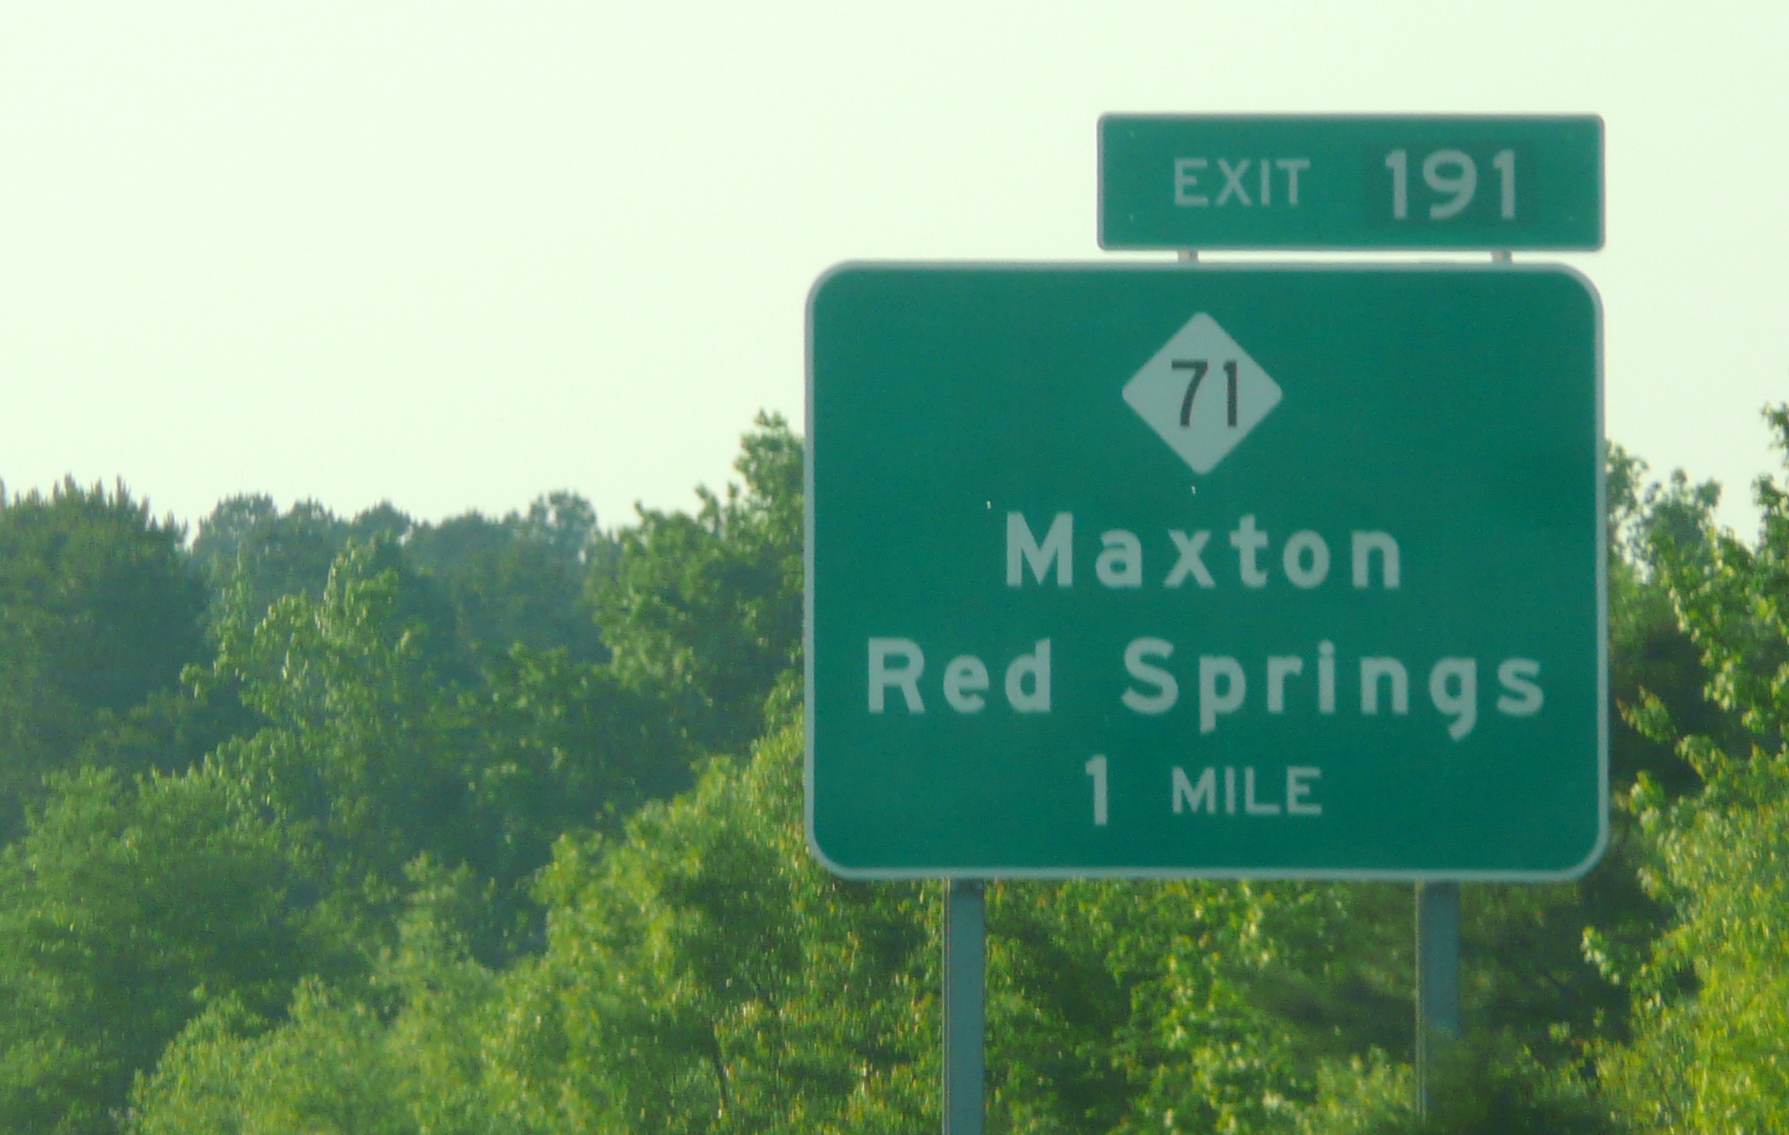 Photo of exit signage for NC 71 on West US 74, courtesy of Jim Mast in May 
2009